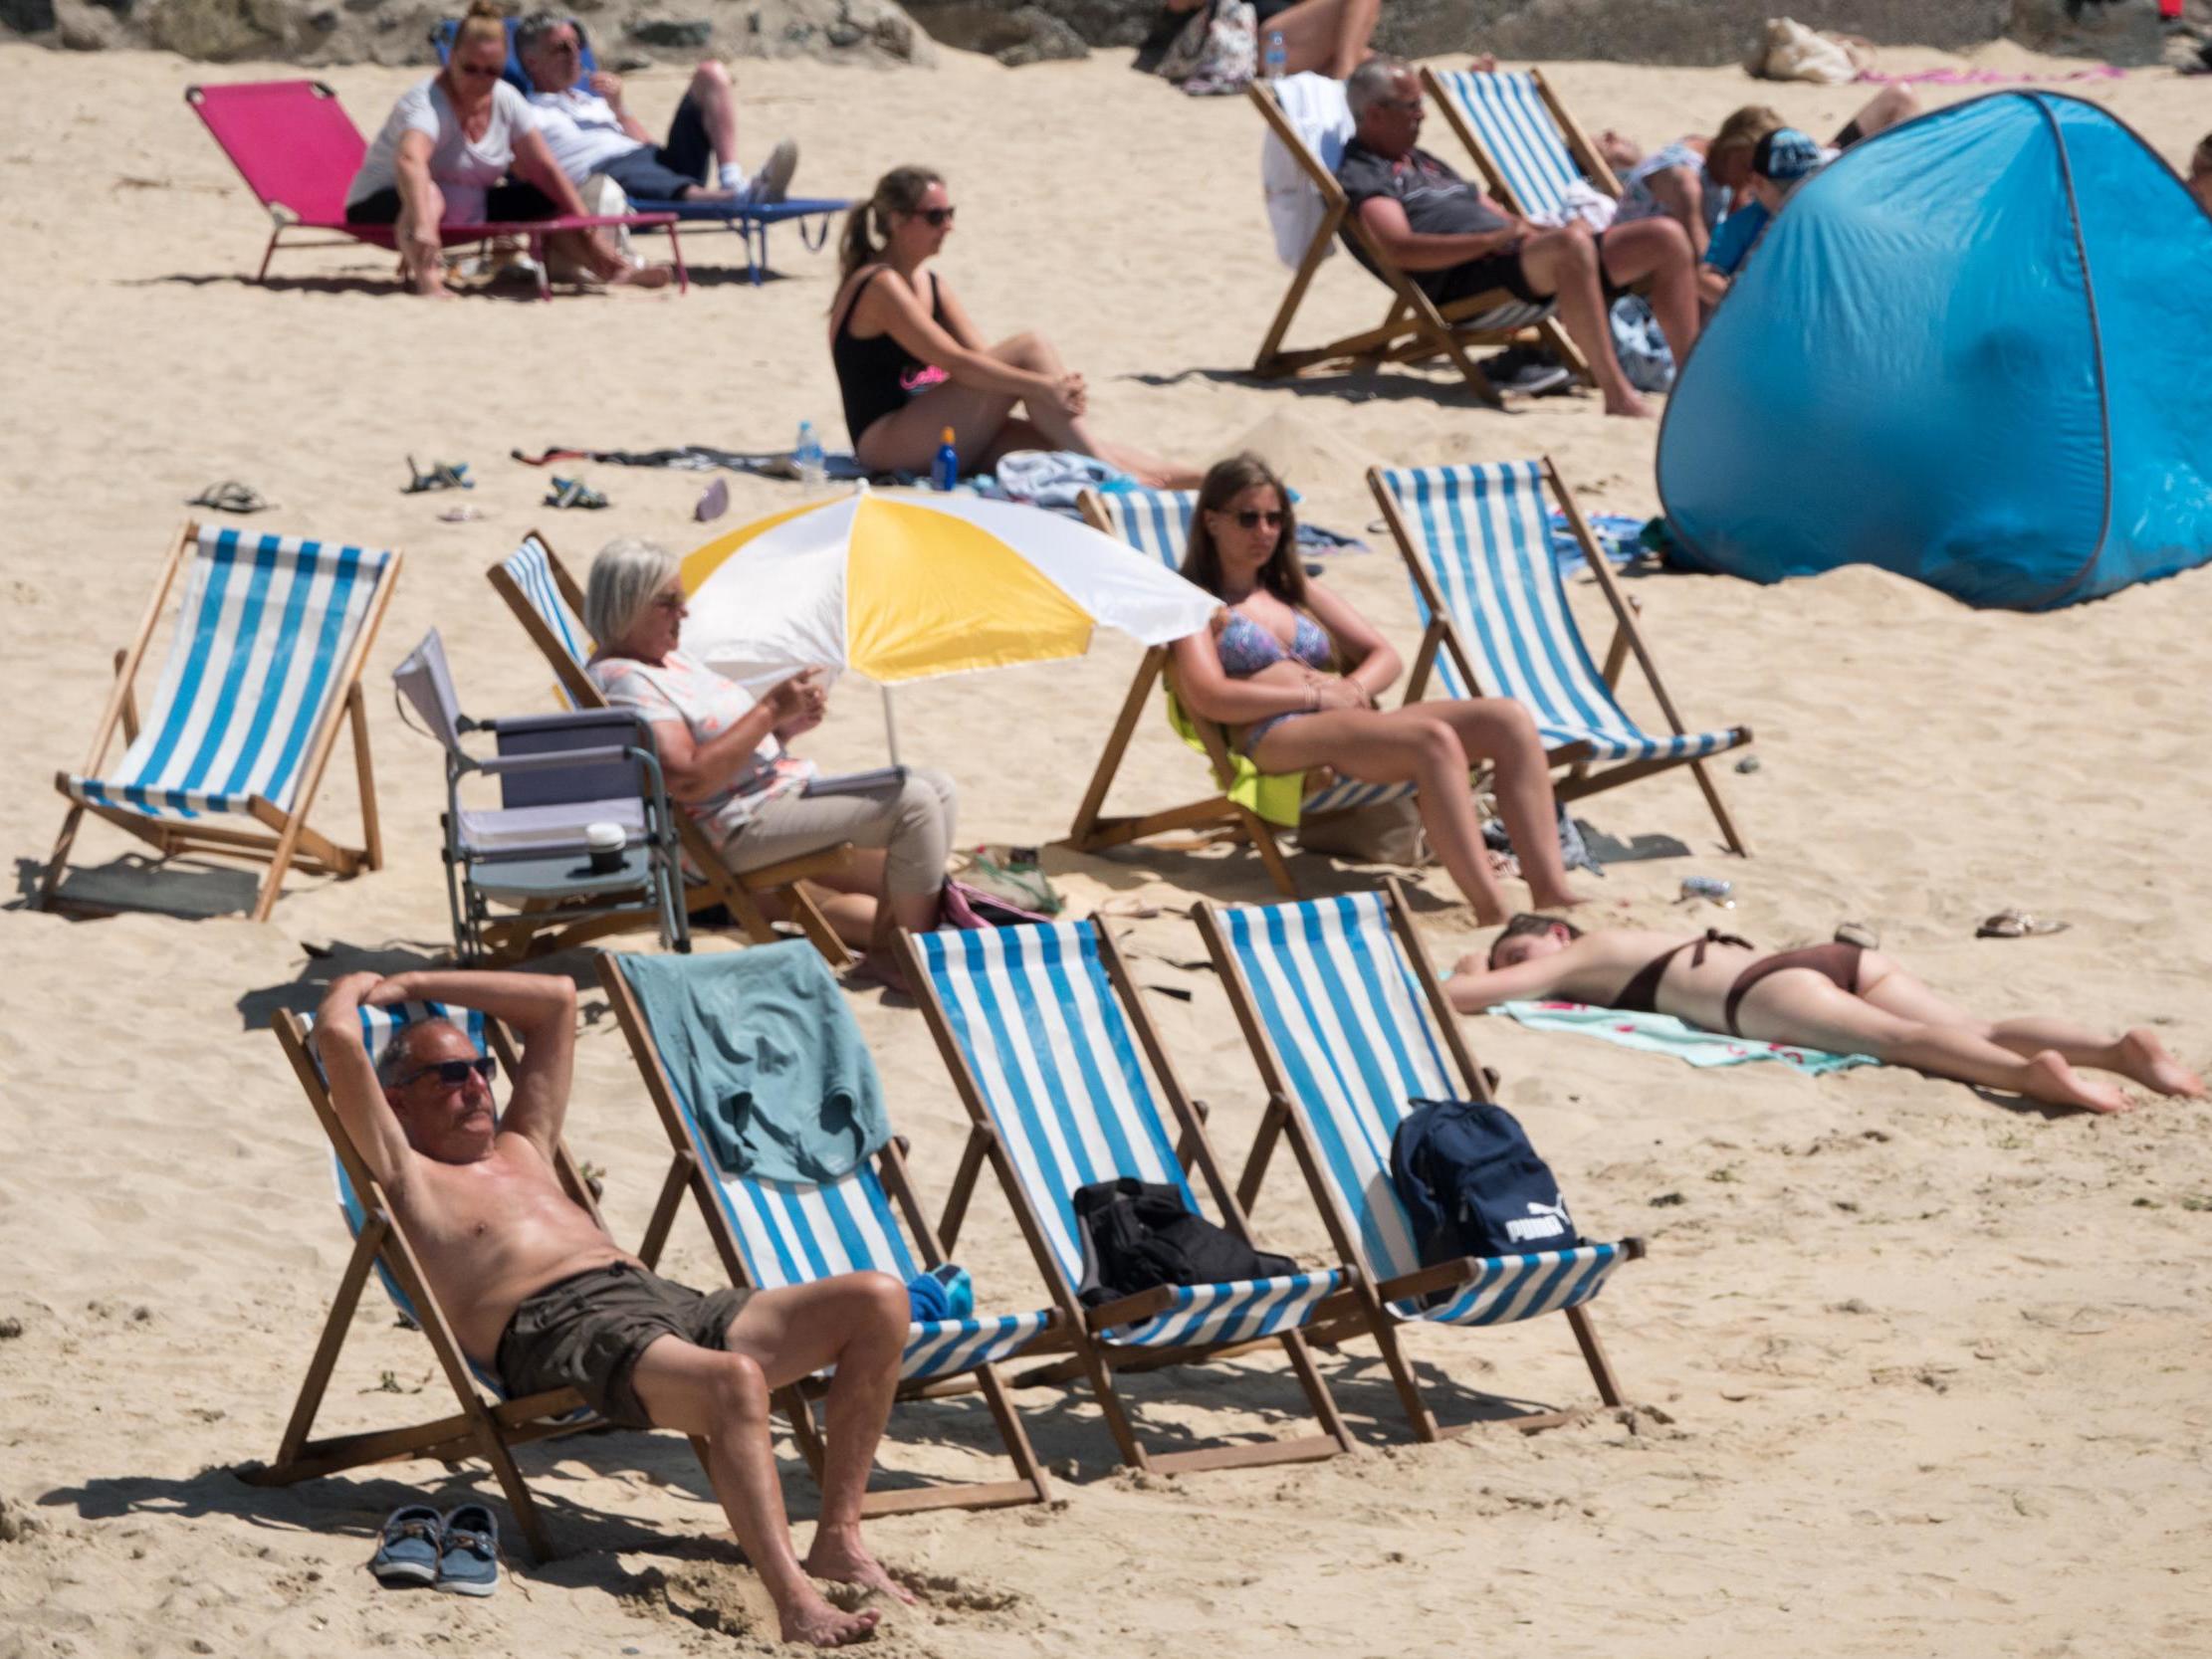 UK weather latest: Met Office warns hottest day of the year is on its way